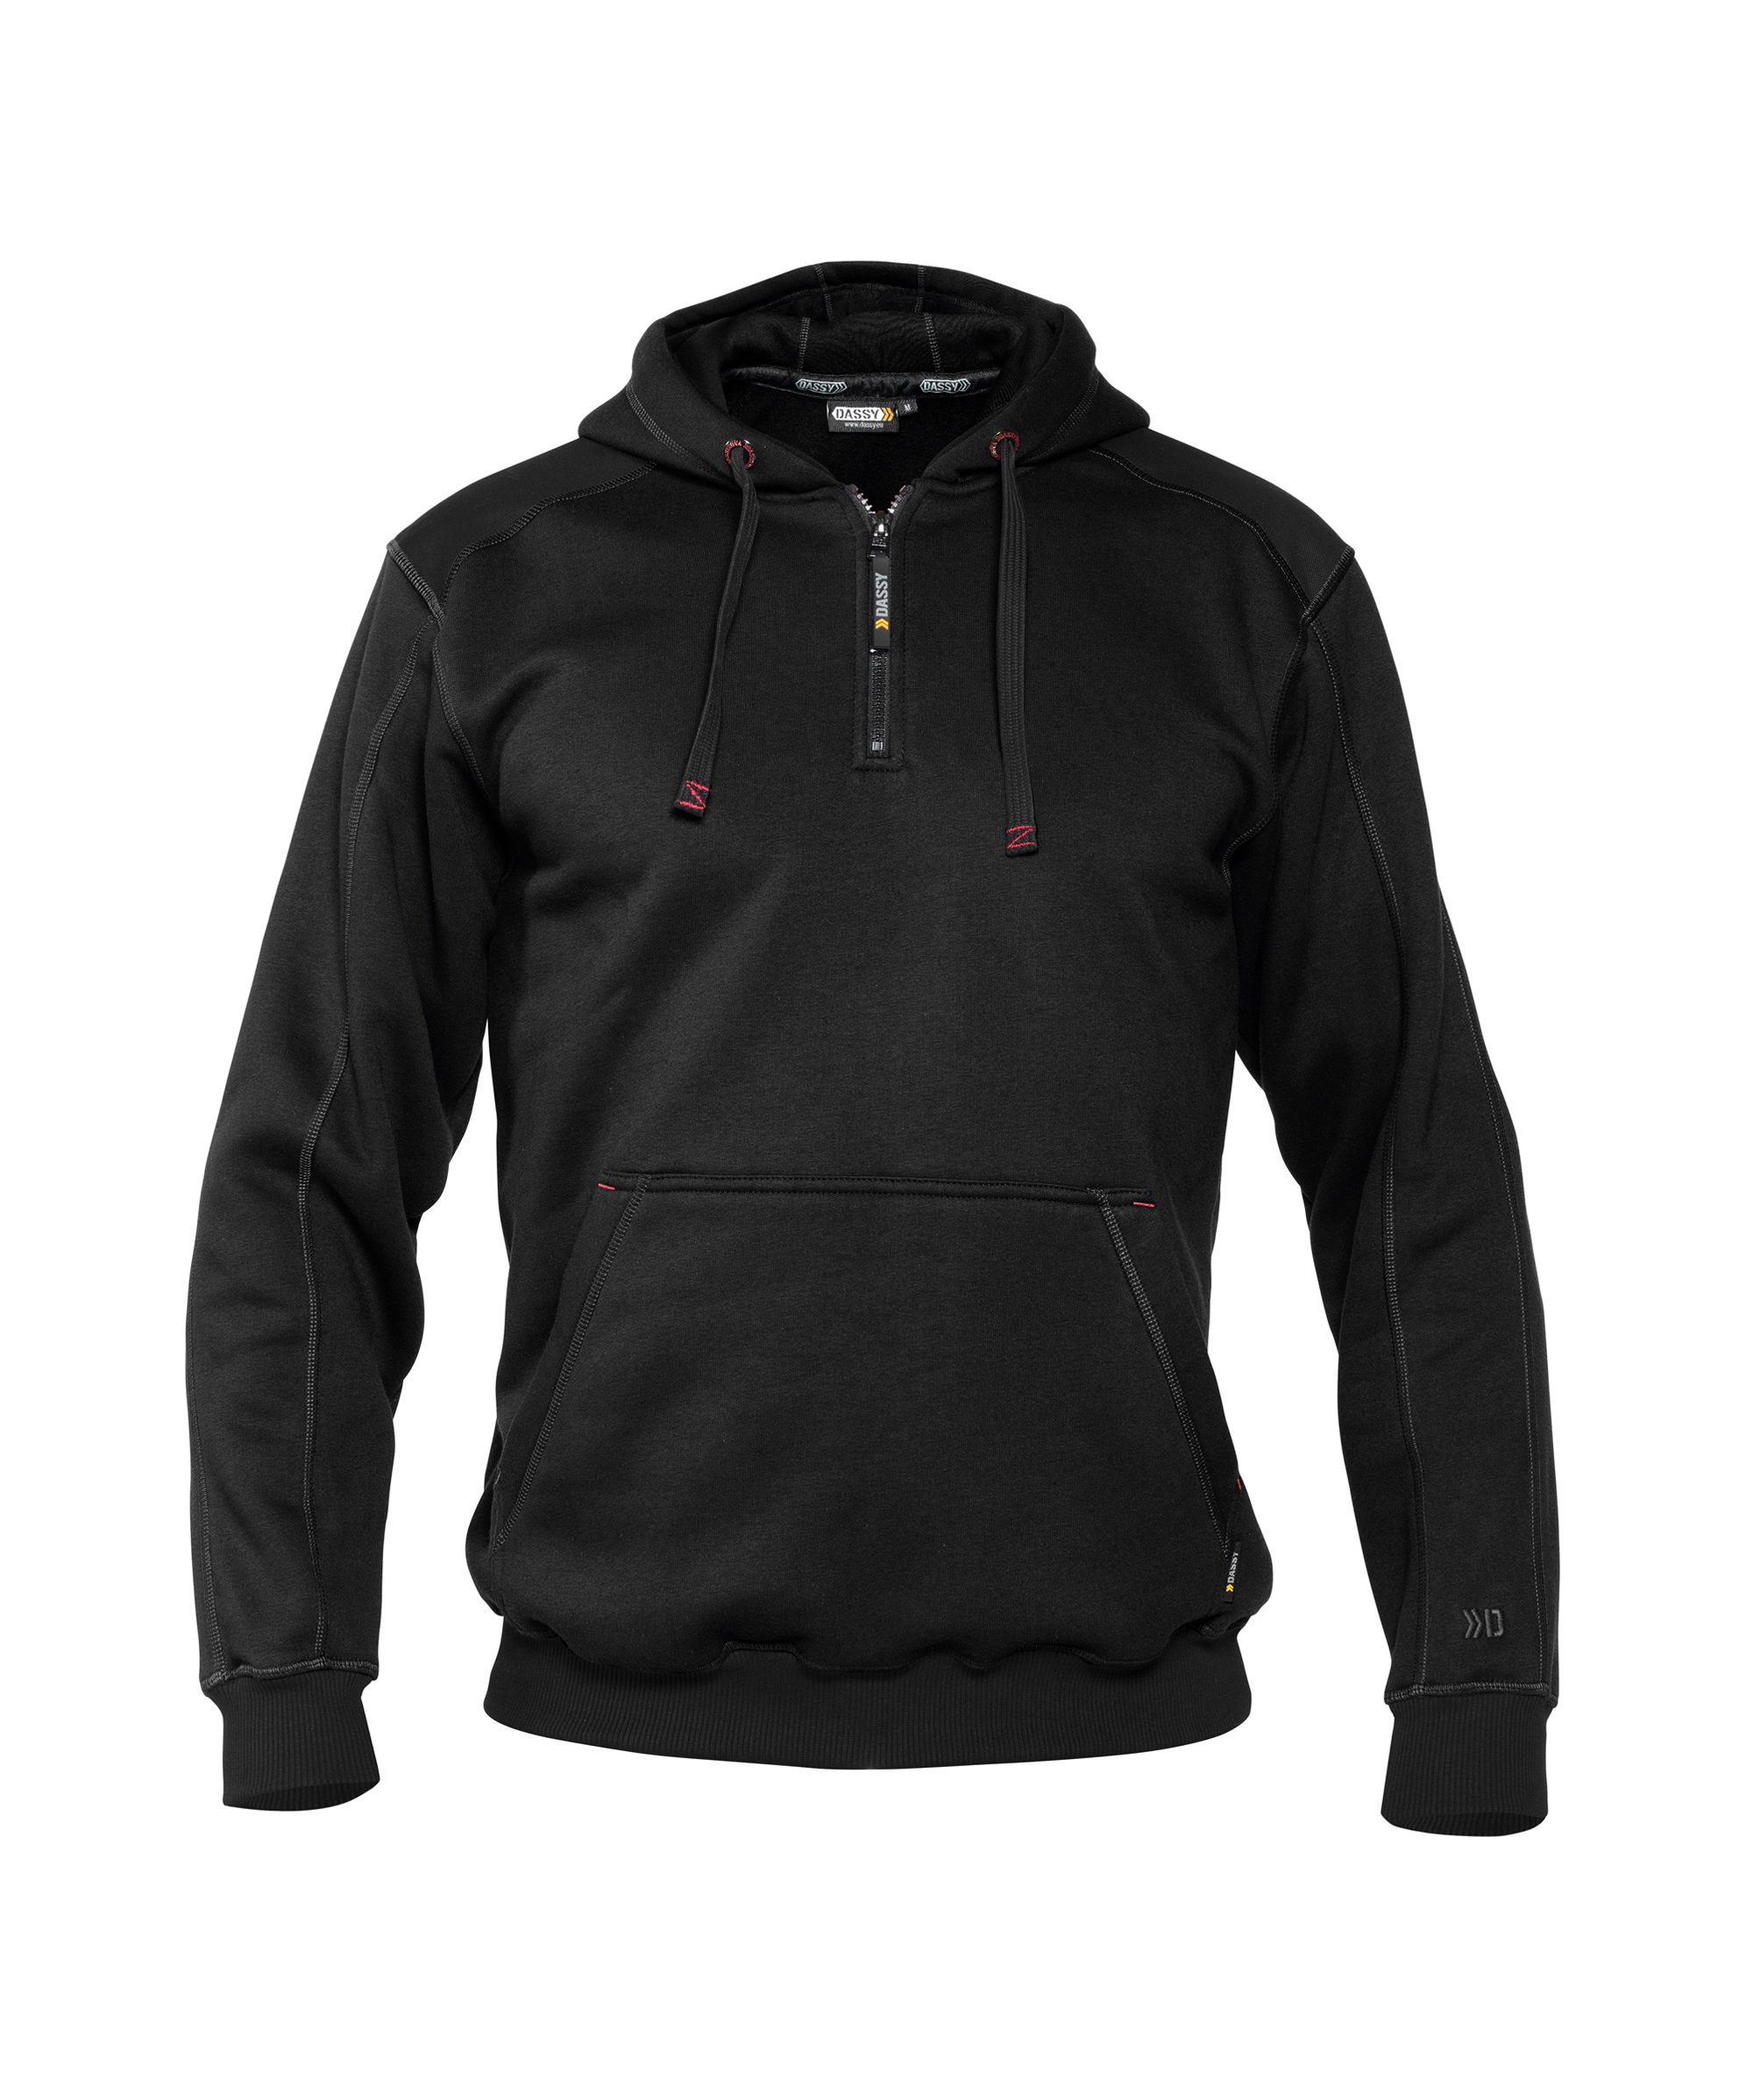 indy_hooded-sweatshirt-reinforced-with-canvas_black_front.jpg